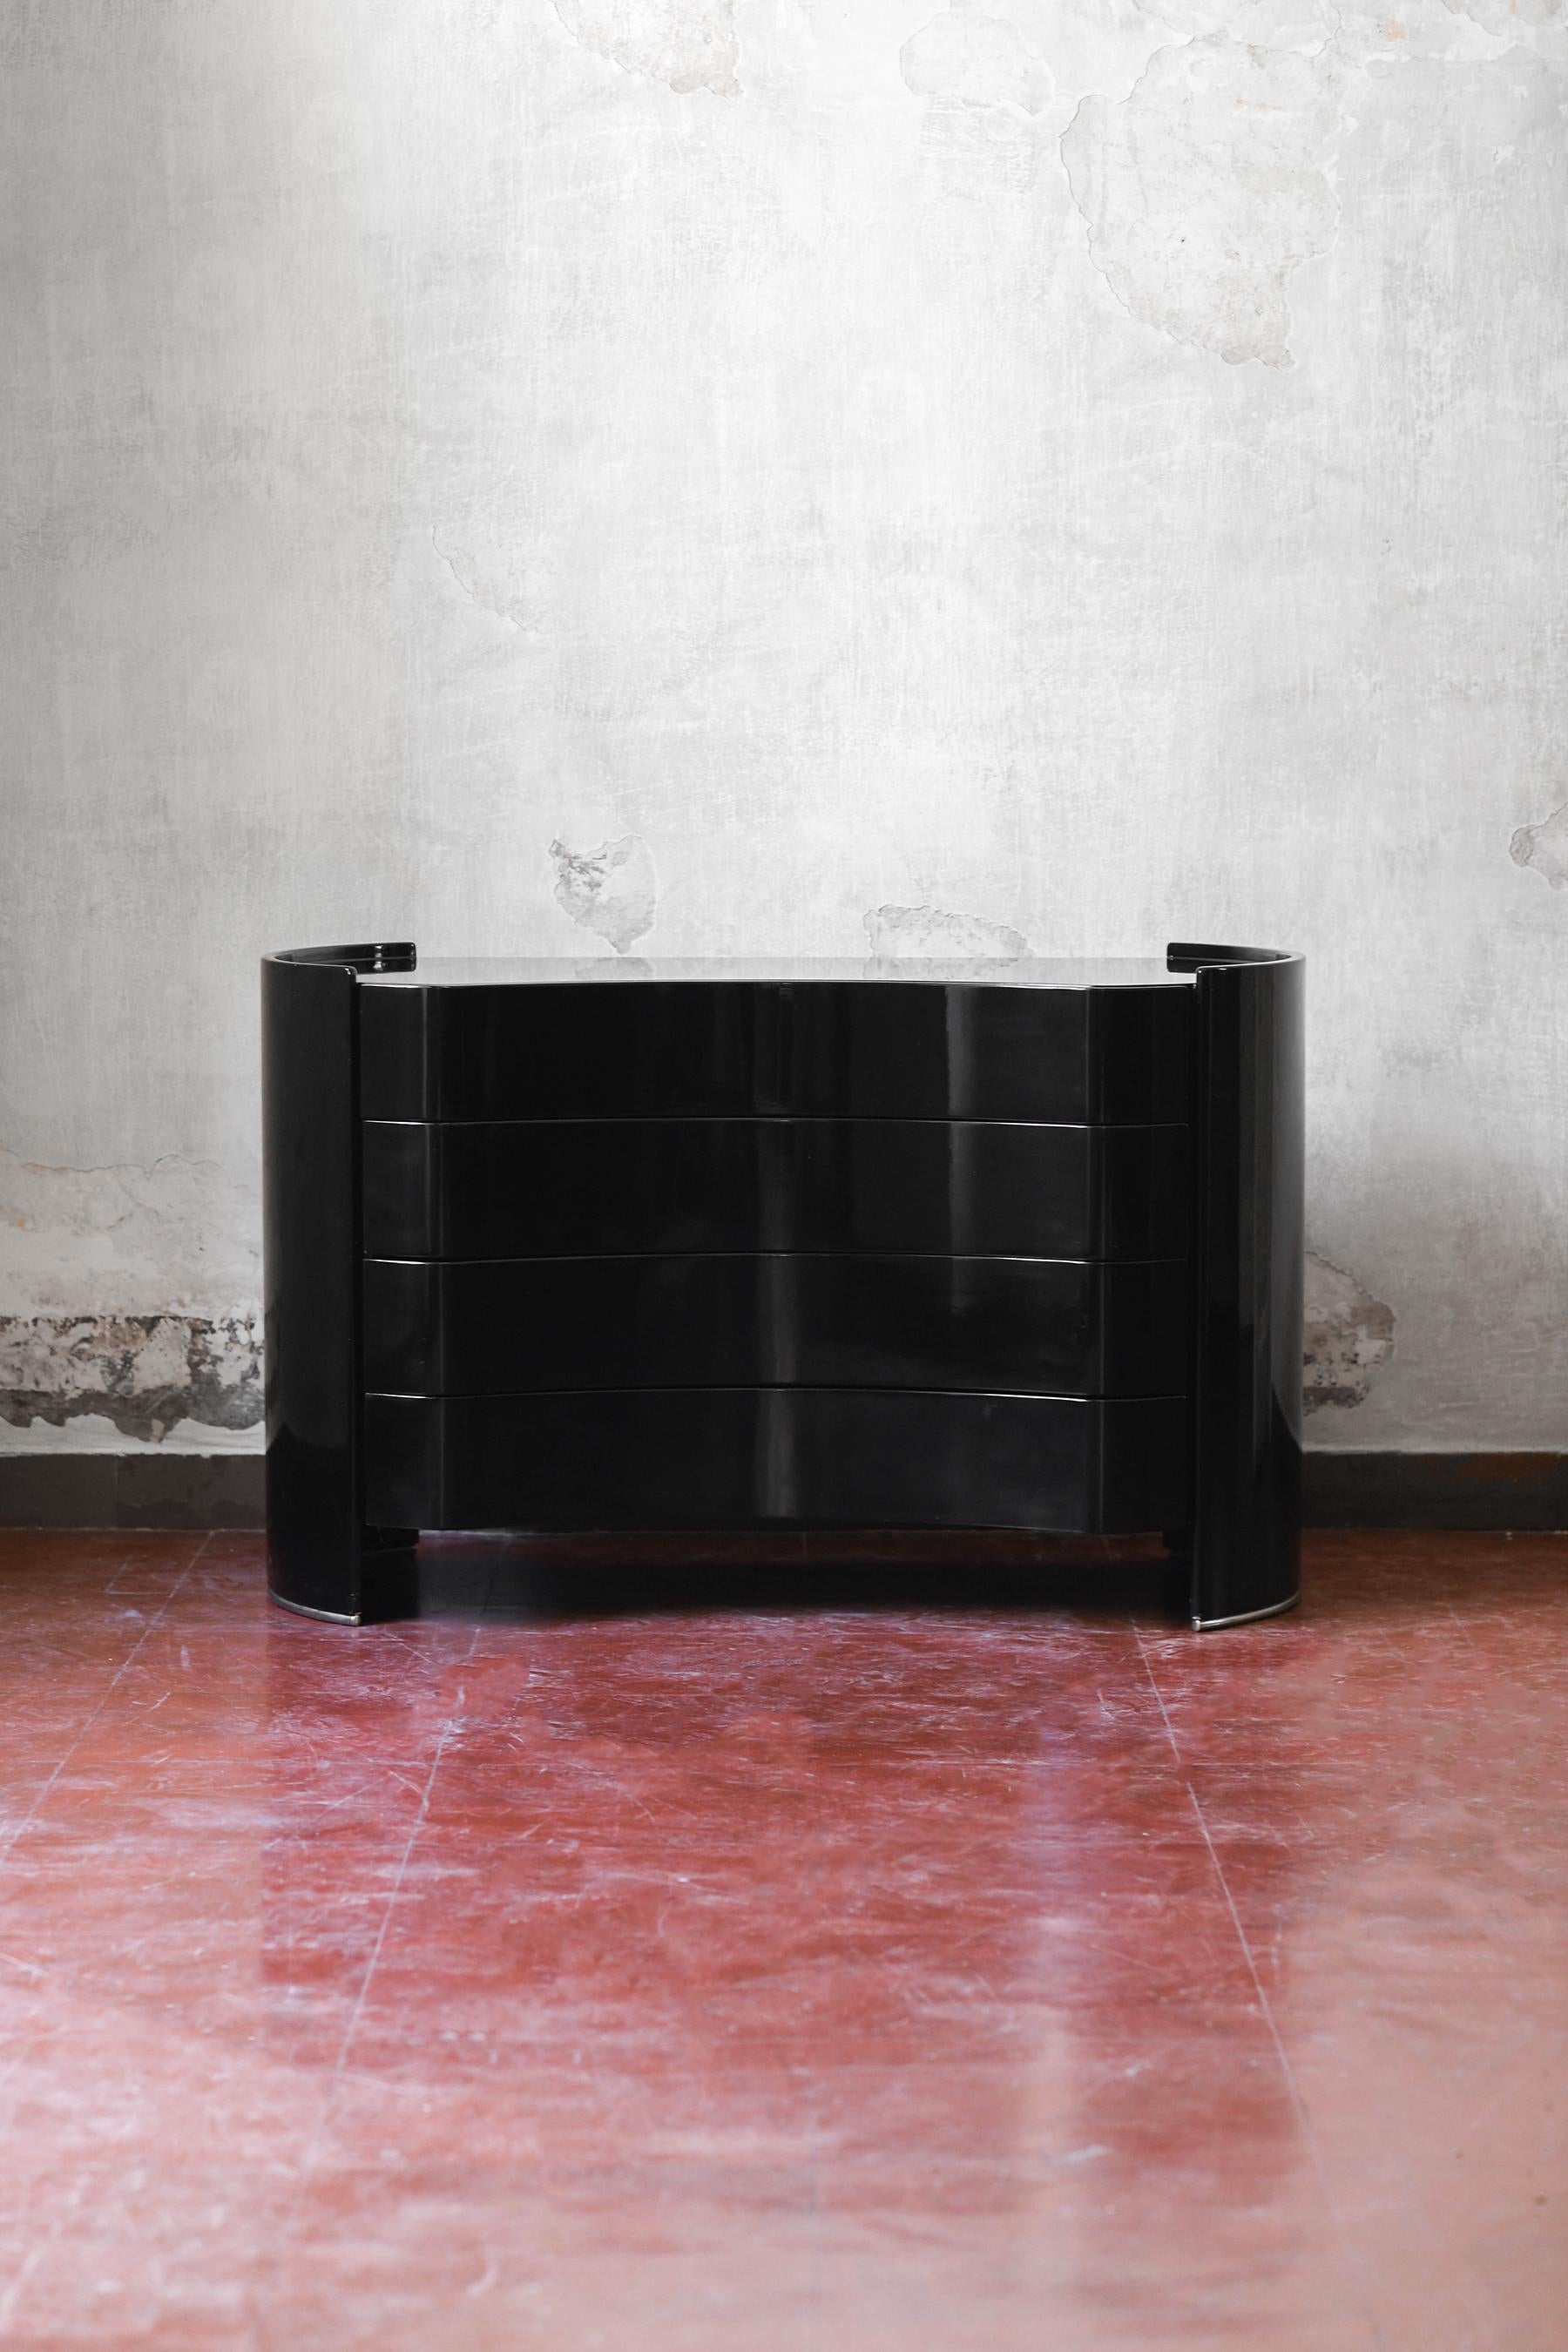 Chest of drawers in black lacquered wood and chromed metal, Kazuhide Takahama  for Gavina
Product details
Dimensions: 120 W x 75 H x 54 D cm